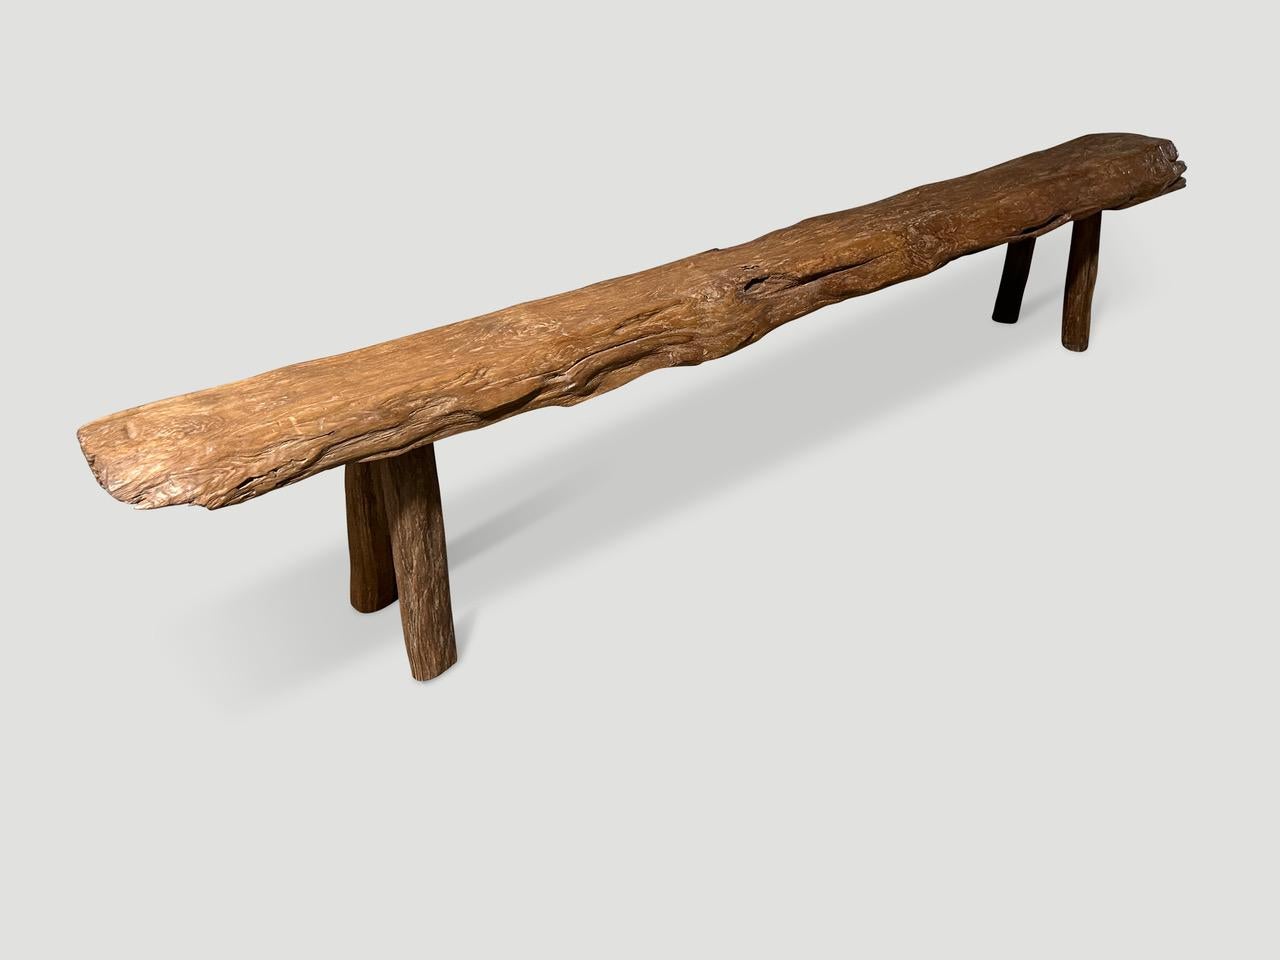 Antique bench hand made from a single thick teak log with beautiful patina and character within the wood. Circa 1950.

This bench was hand made in the spirit of Wabi-Sabi, a Japanese philosophy that beauty can be found in imperfection and